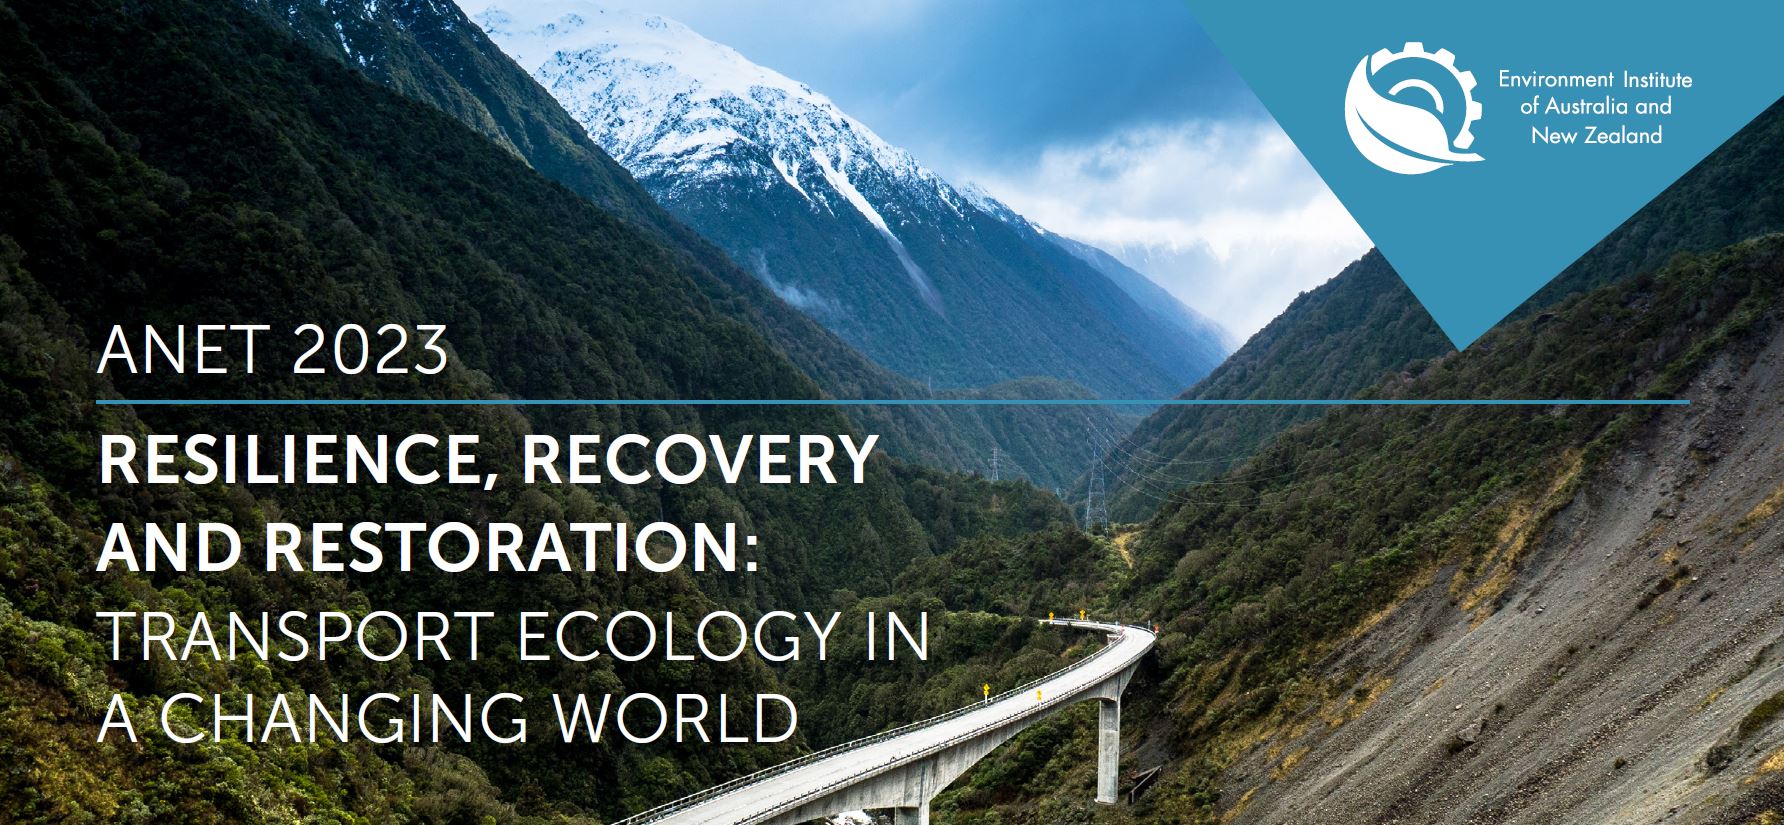 ANET 2023 | Resilience, recover and restoration: transport ecology in a changing world